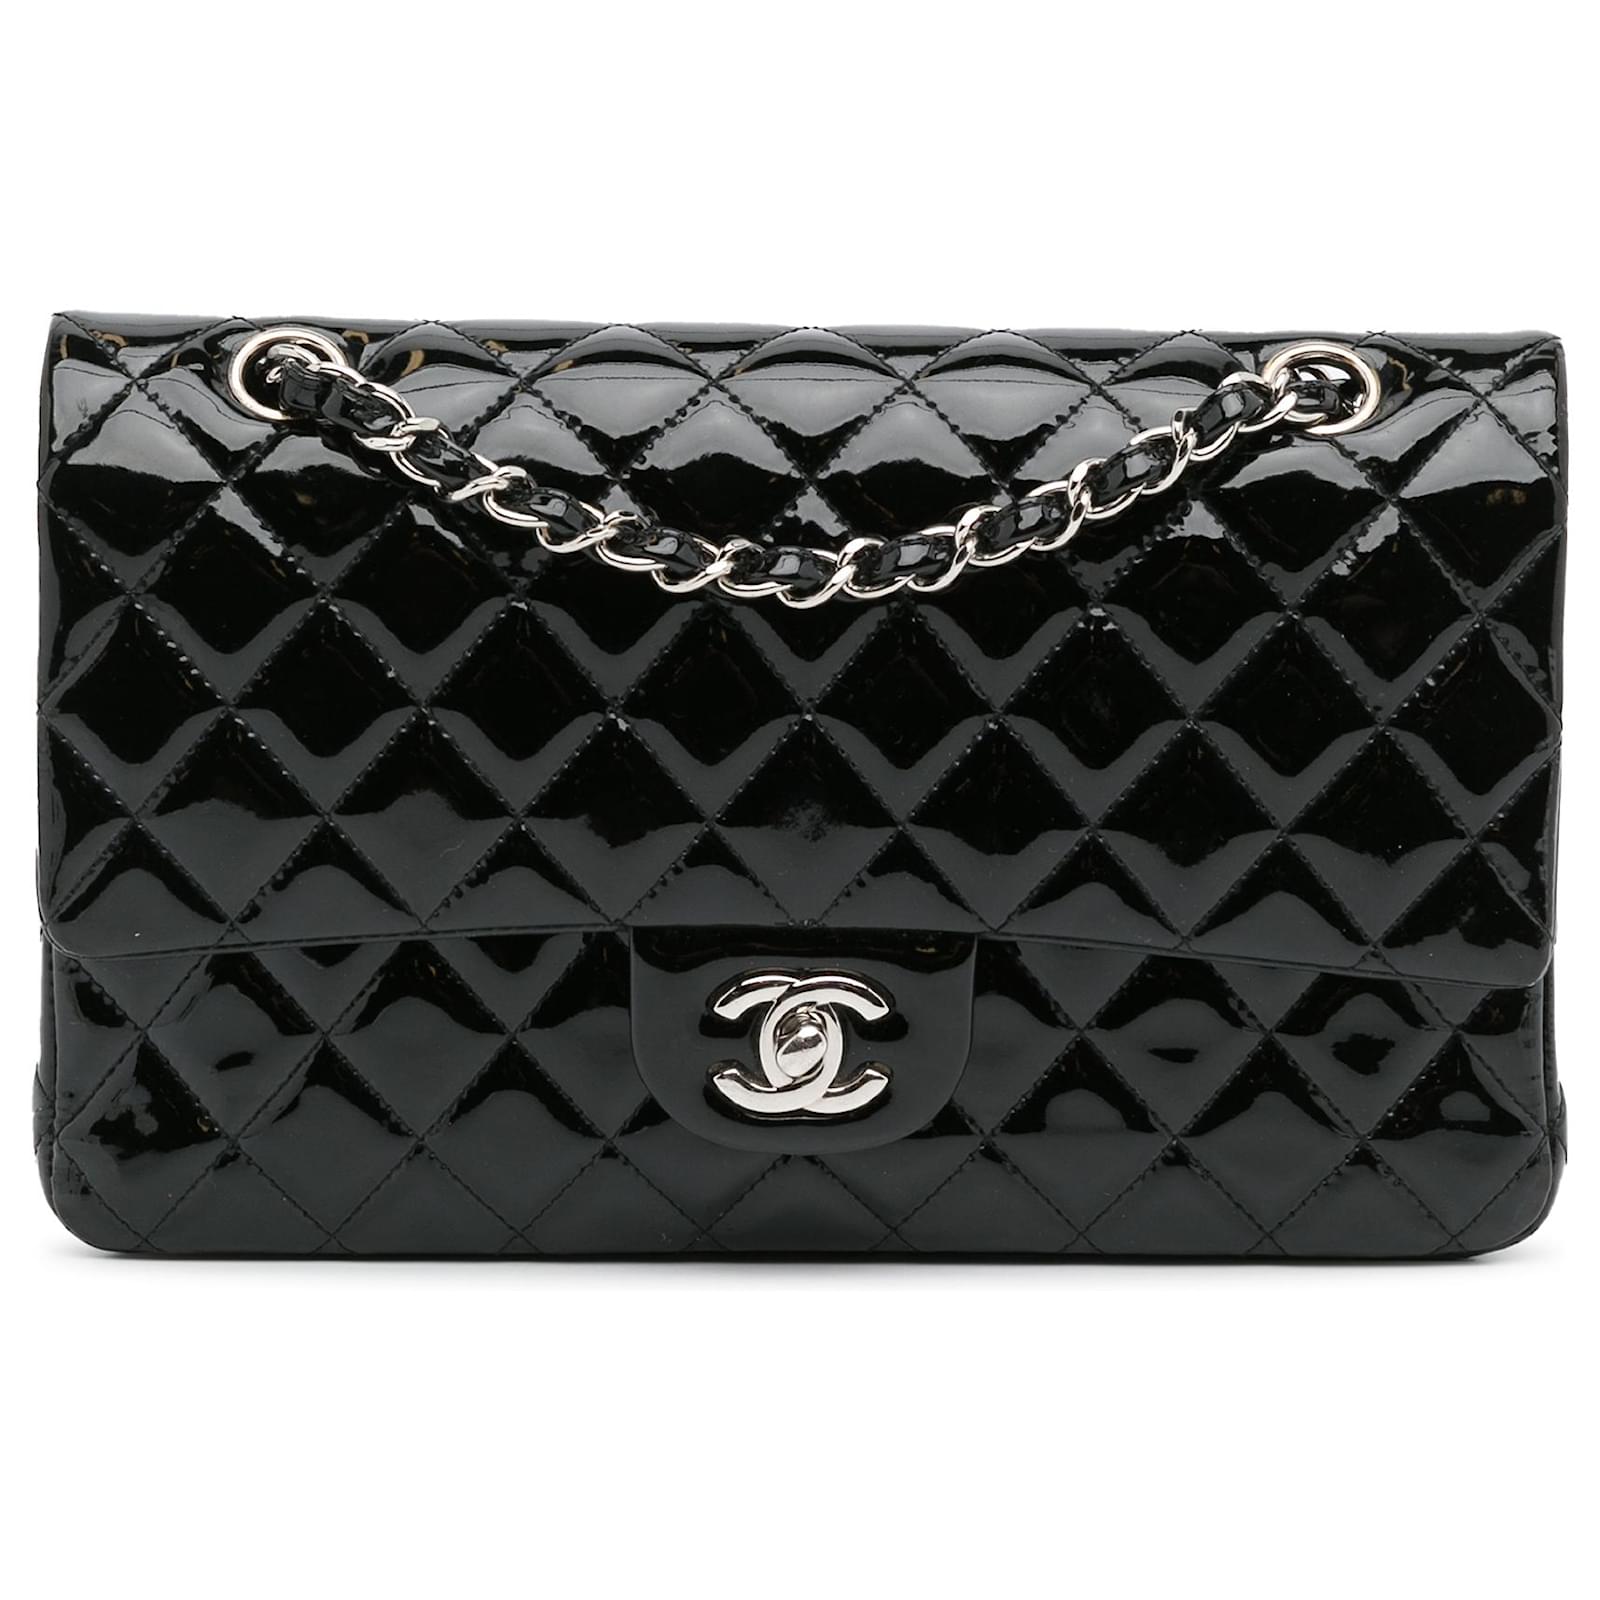 Chanel Black Medium Classic Patent lined Flap Leather Patent